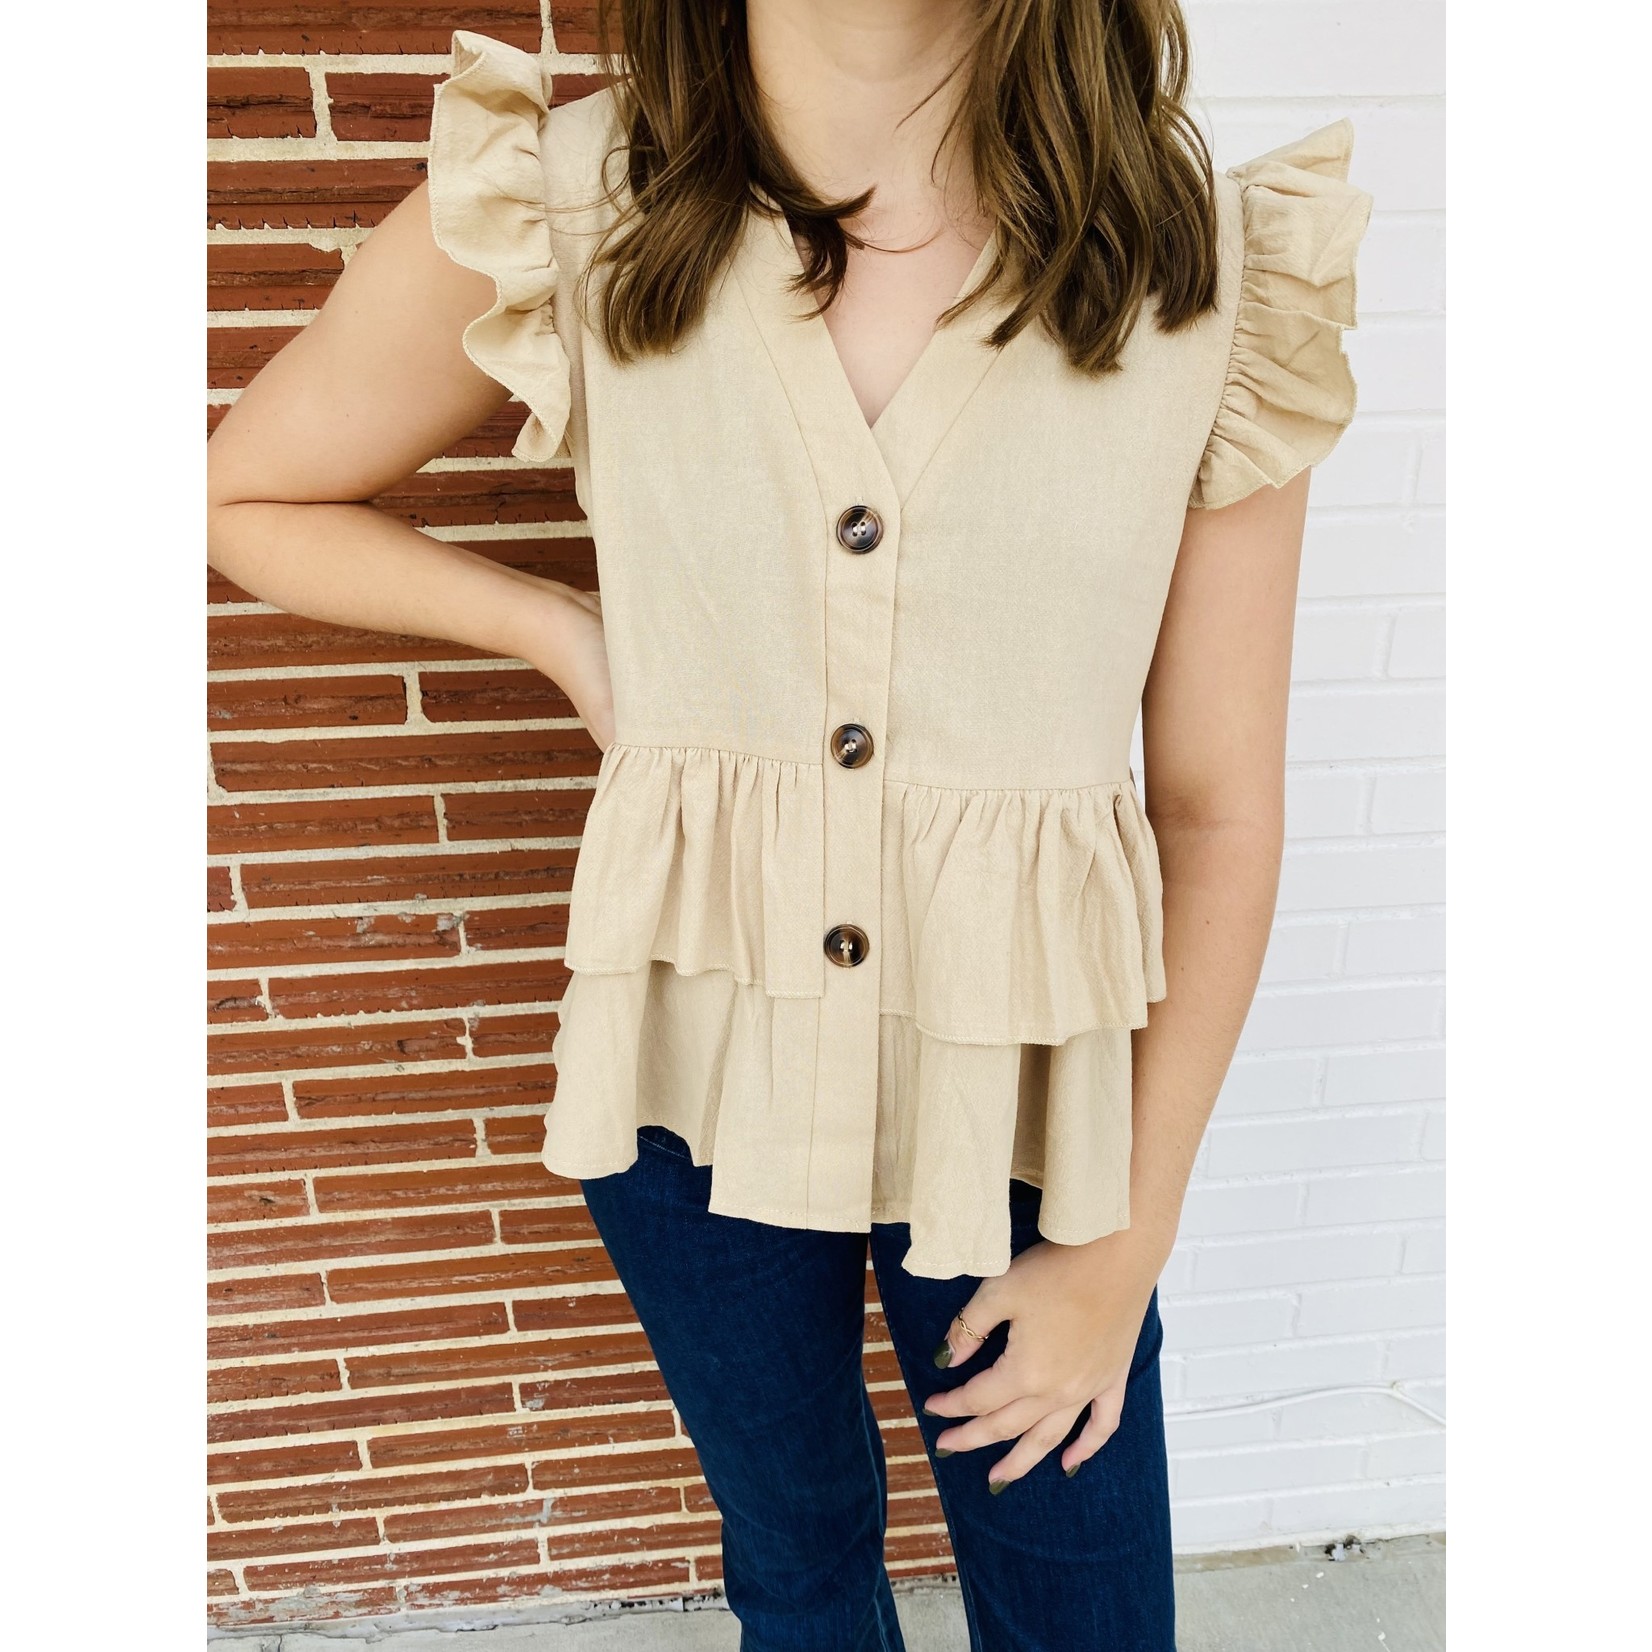 Lily Clothing Khaki Button Up Tiered Sleeveless Top